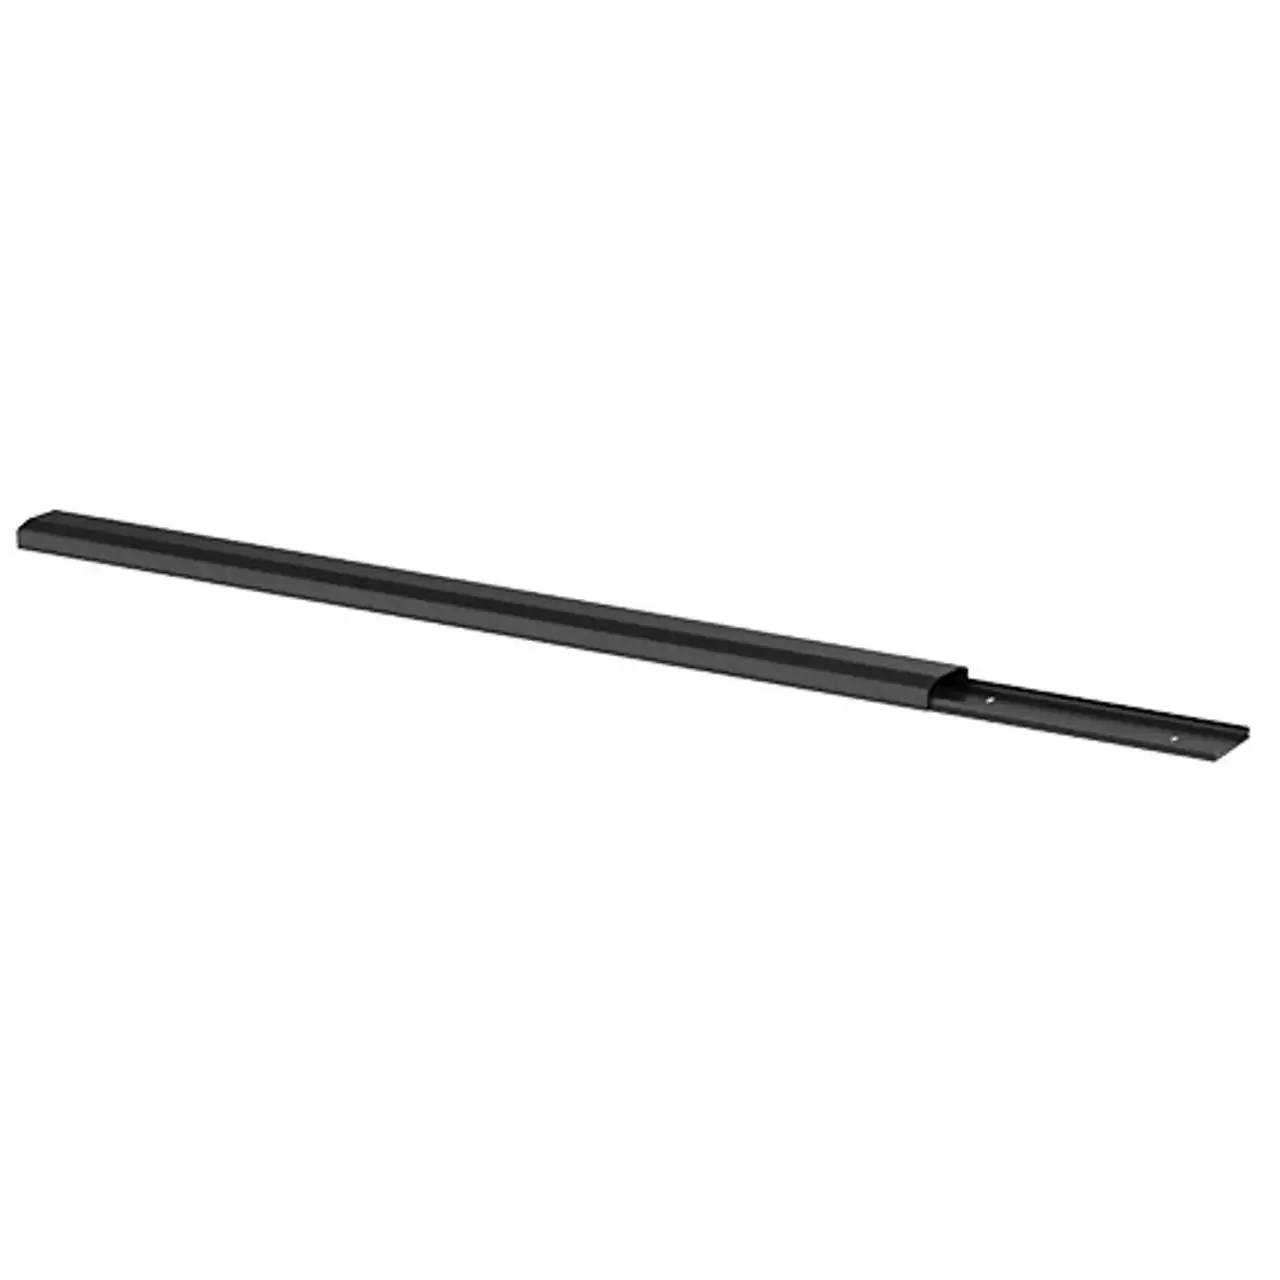 Brateck Plastic Cable Cover 750mm - Black